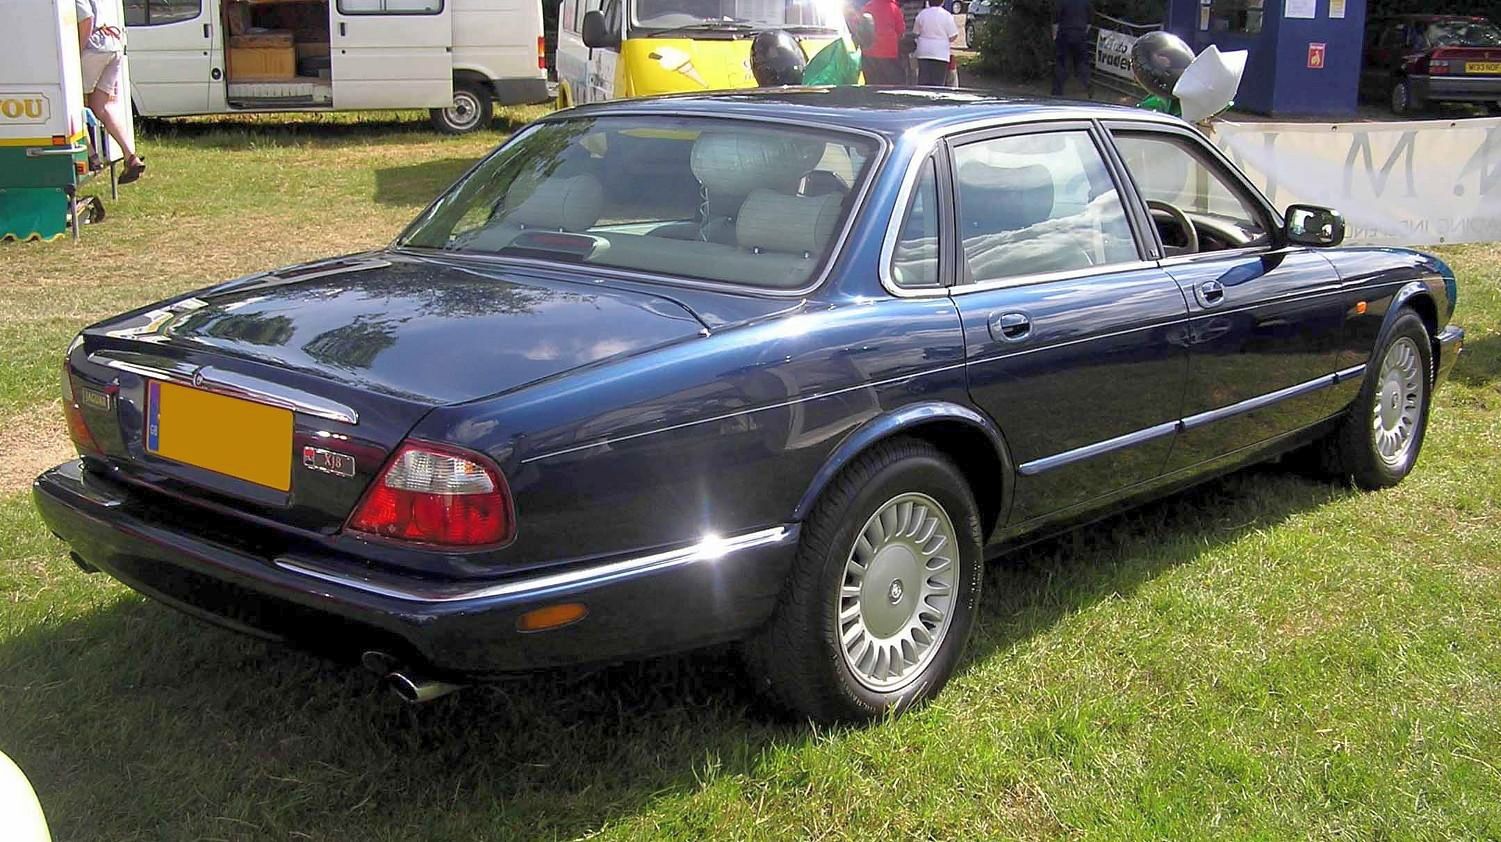 1998 Jaguar XJ8. Although the new car was improved over the X300 and 